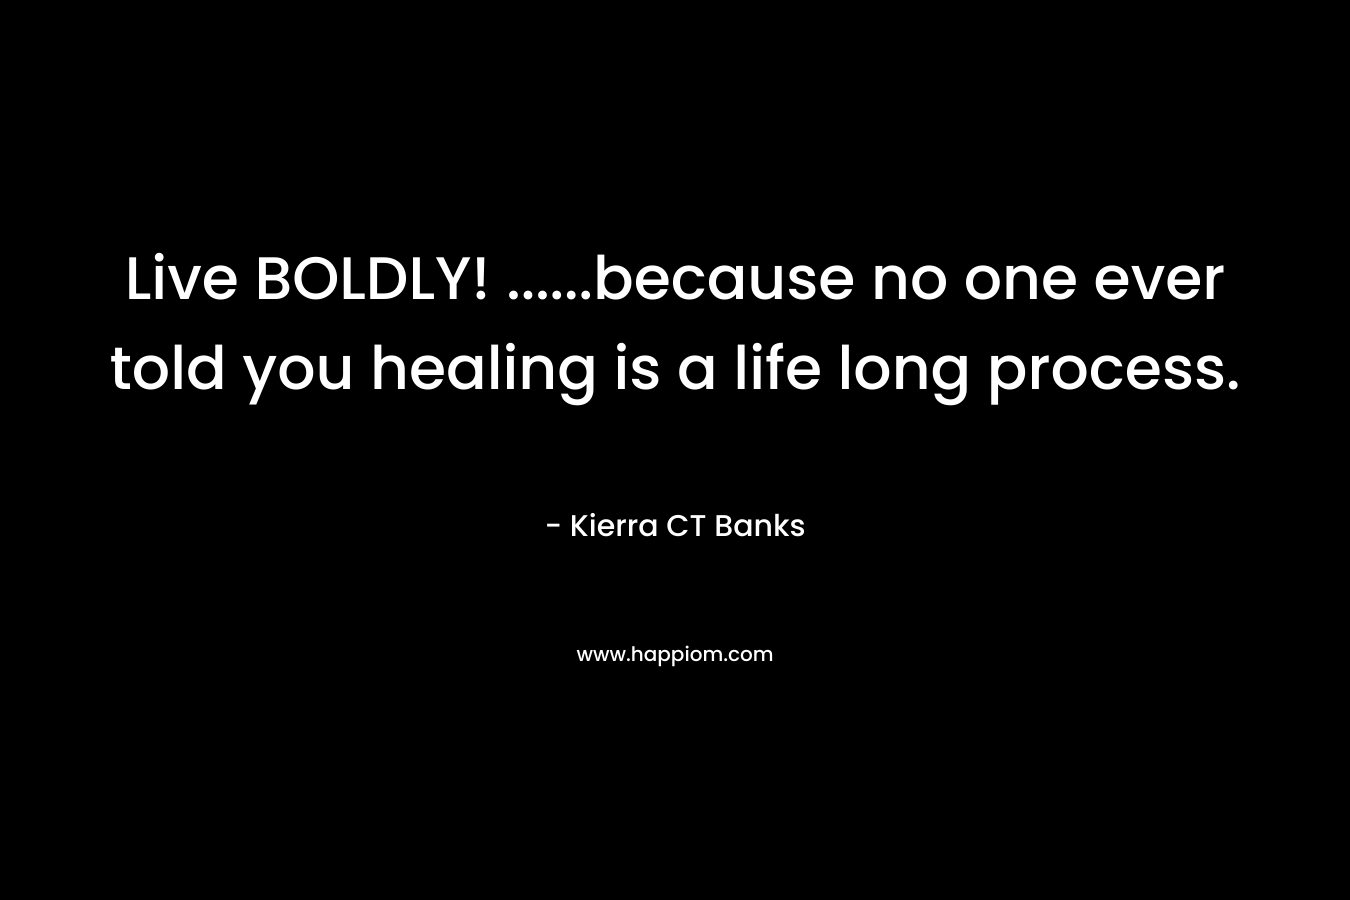 Live BOLDLY! ......because no one ever told you healing is a life long process.